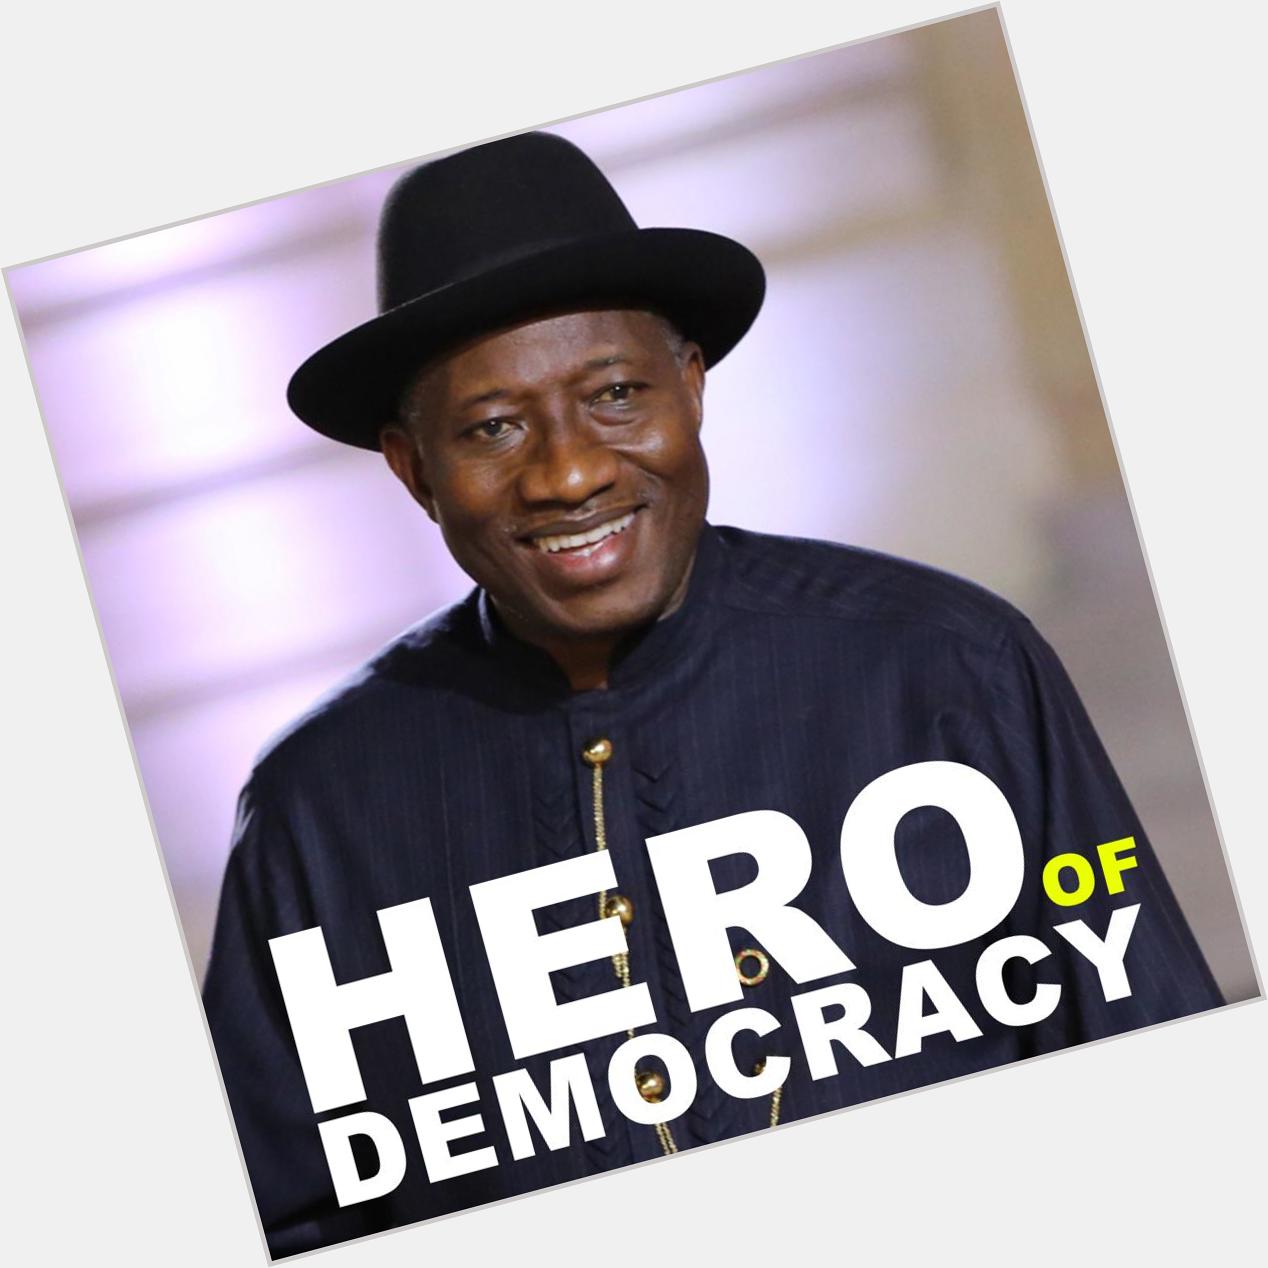 Happy 58th bday to Goodluck Jonathan, the face of democracy in Africa. 

Many more years to you sir. 